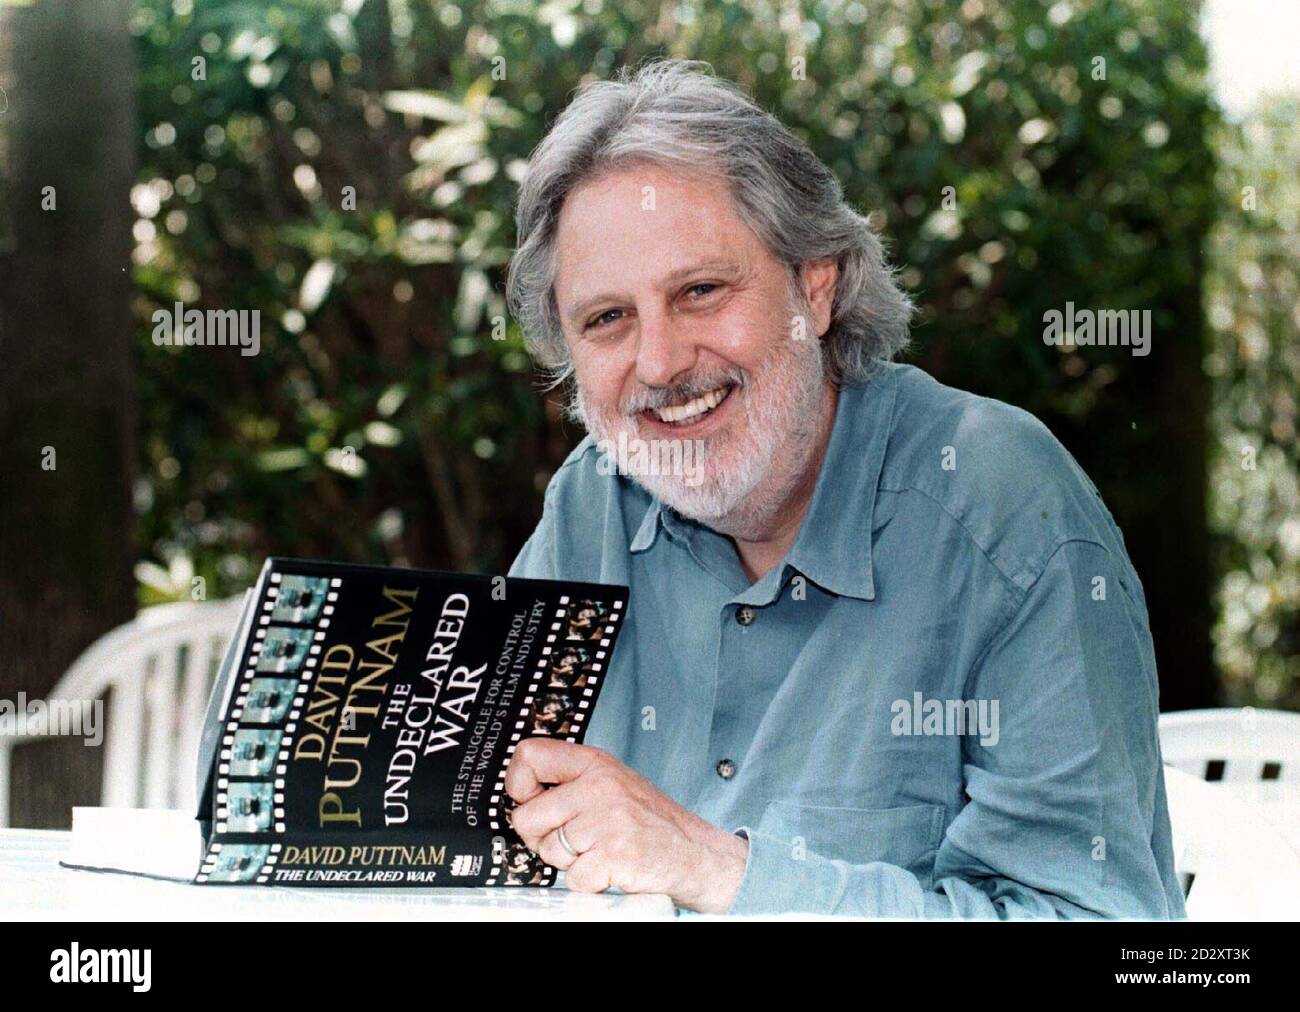 Movie mogul Sir David Puttnam, as part of the British film contingent at the 50th Cannes Film Festival, where he launched his new book 'The Undeclared War'. Stock Photo